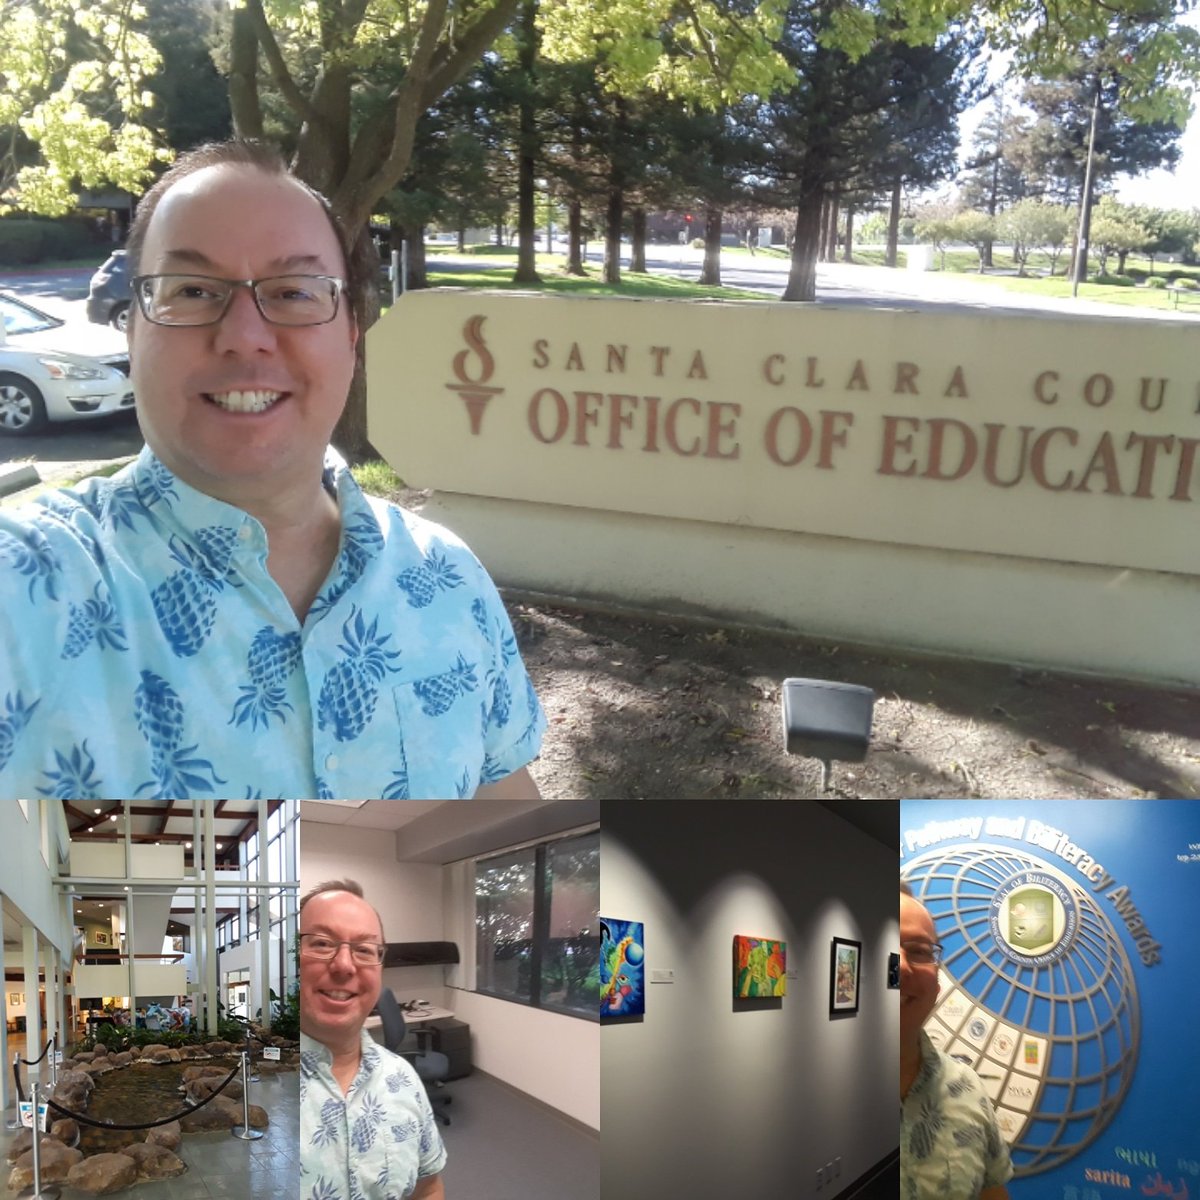 Grateful for the professional opportunities you are given. Amazing work, learning, and growth at #WeareSCCOE! Much aloha to my friends and colleagues.